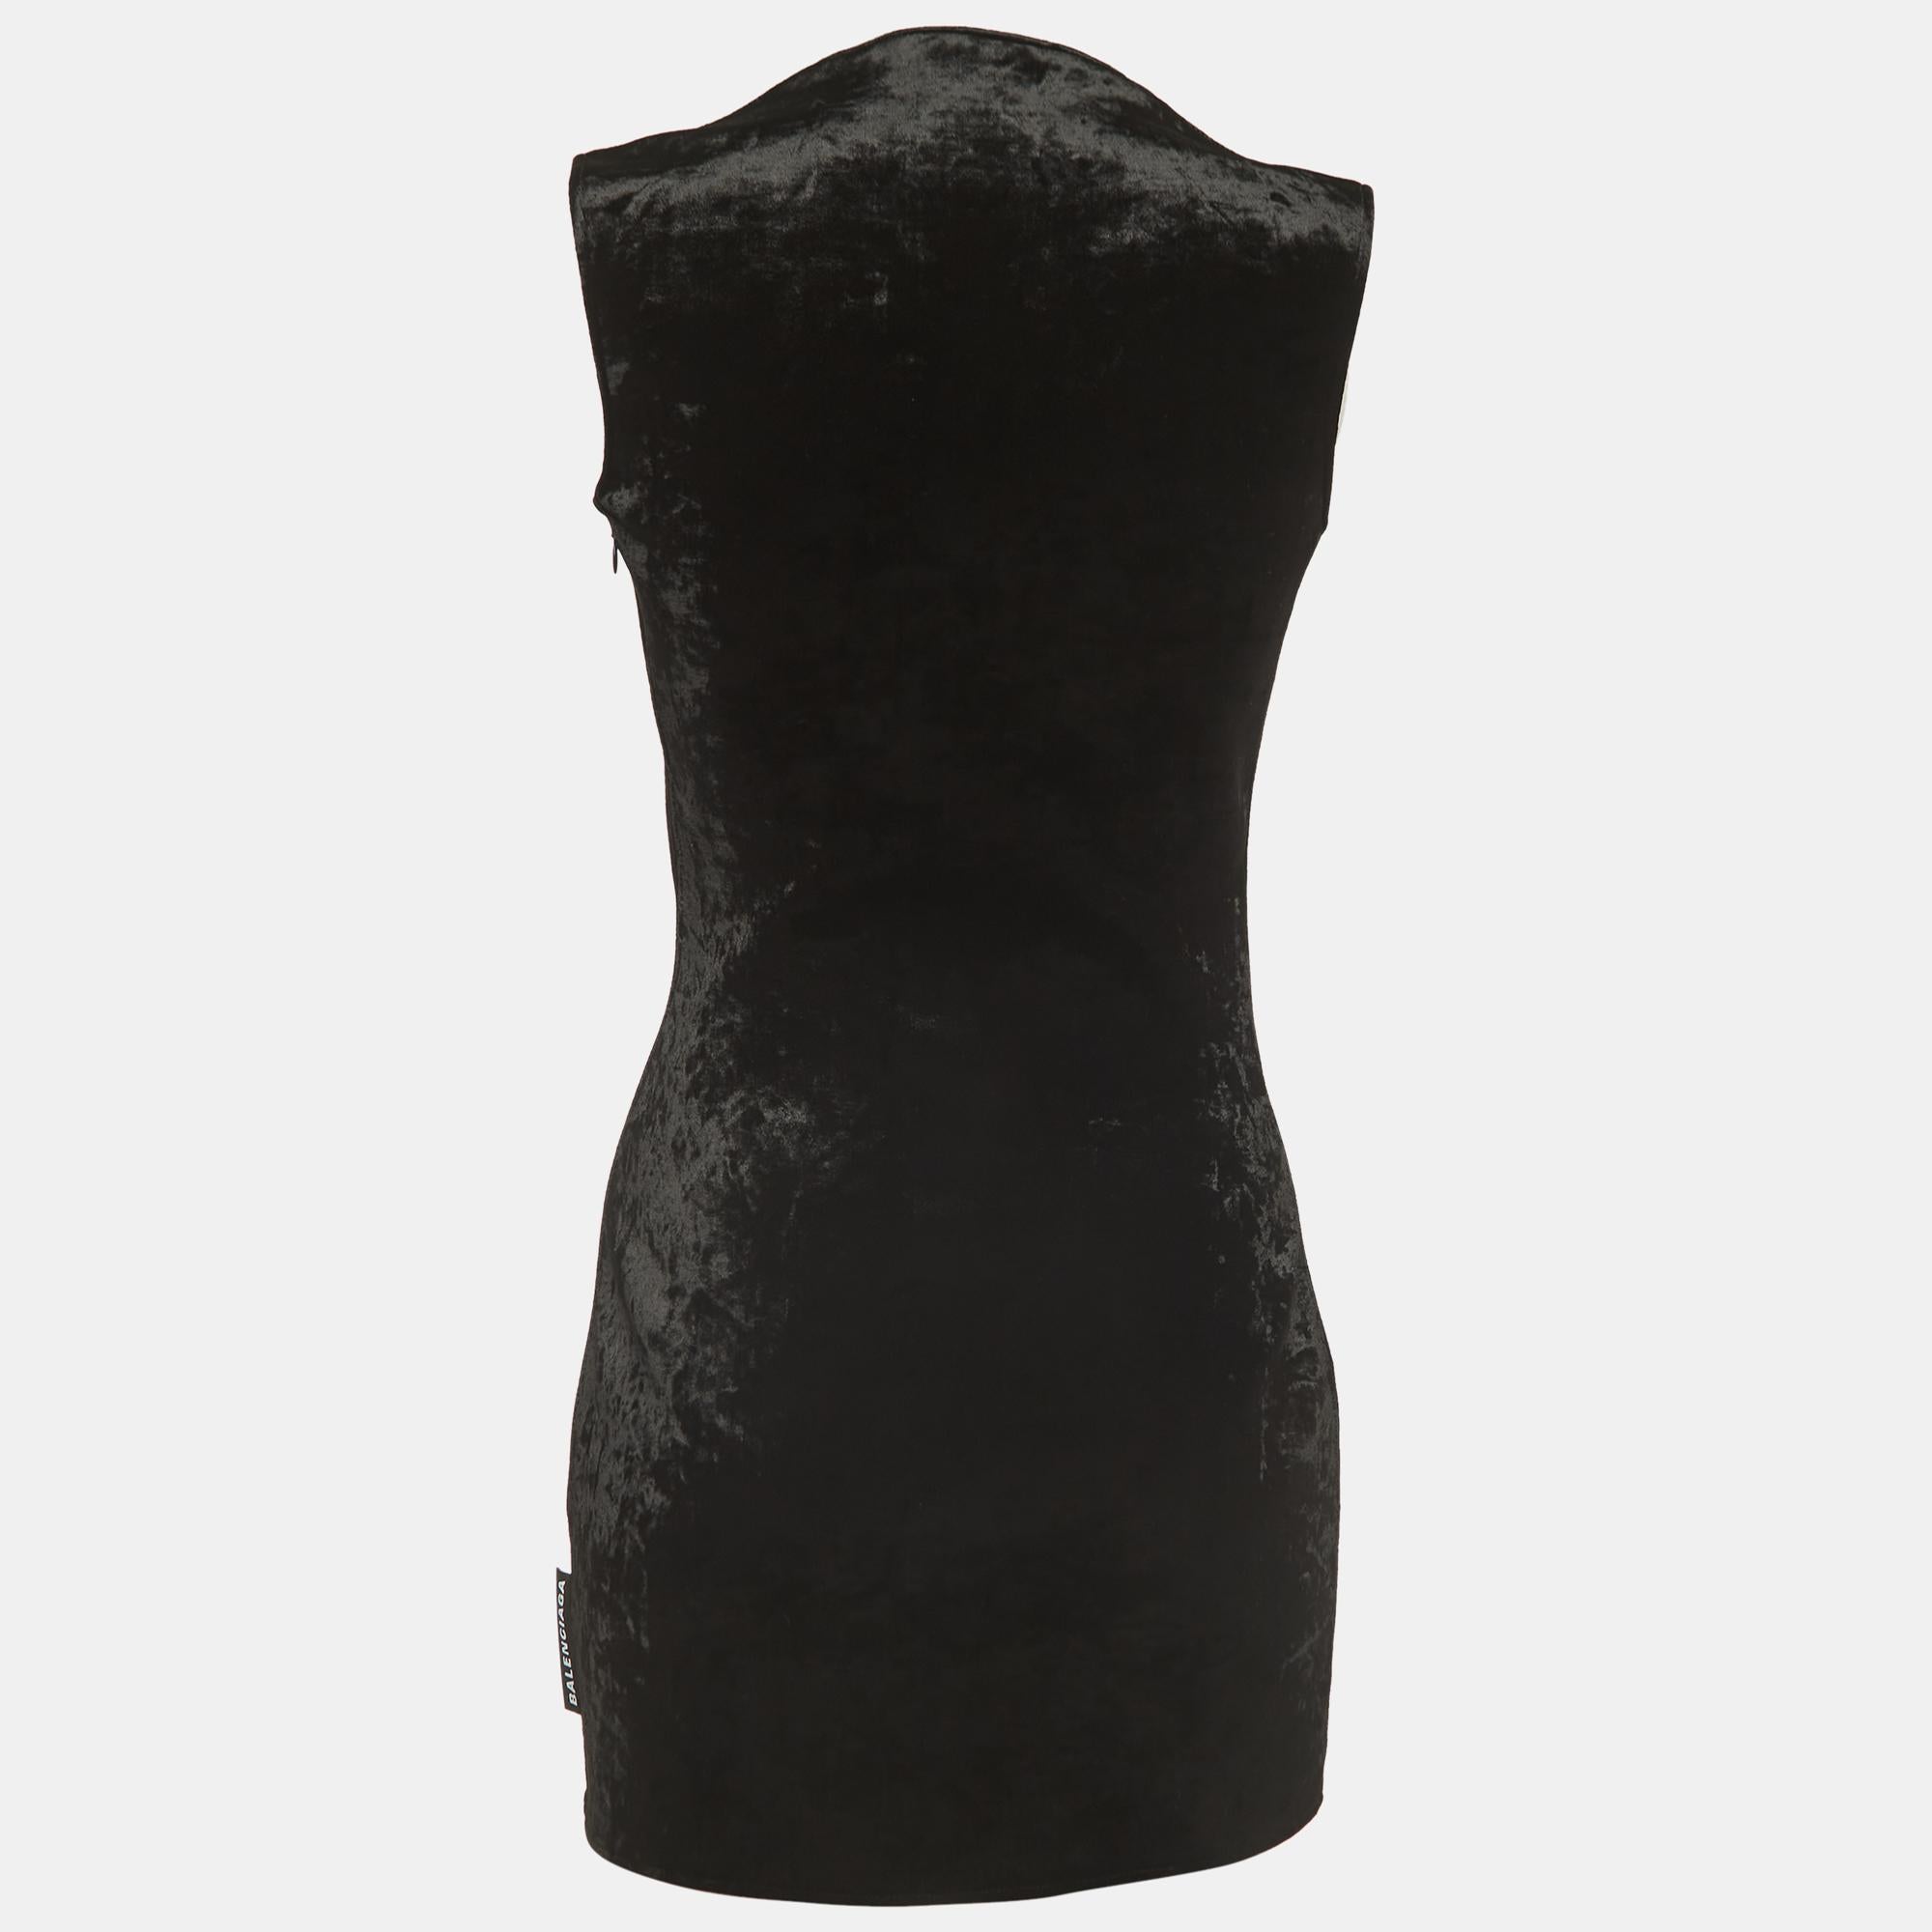 Invest in creating a well-curated wardrobe with 'wearable' pieces like this Balenciaga mini dress. Tailored beautifully, the dress has a lovely neckline and a comfortable fit.

Includes: Brand Tag